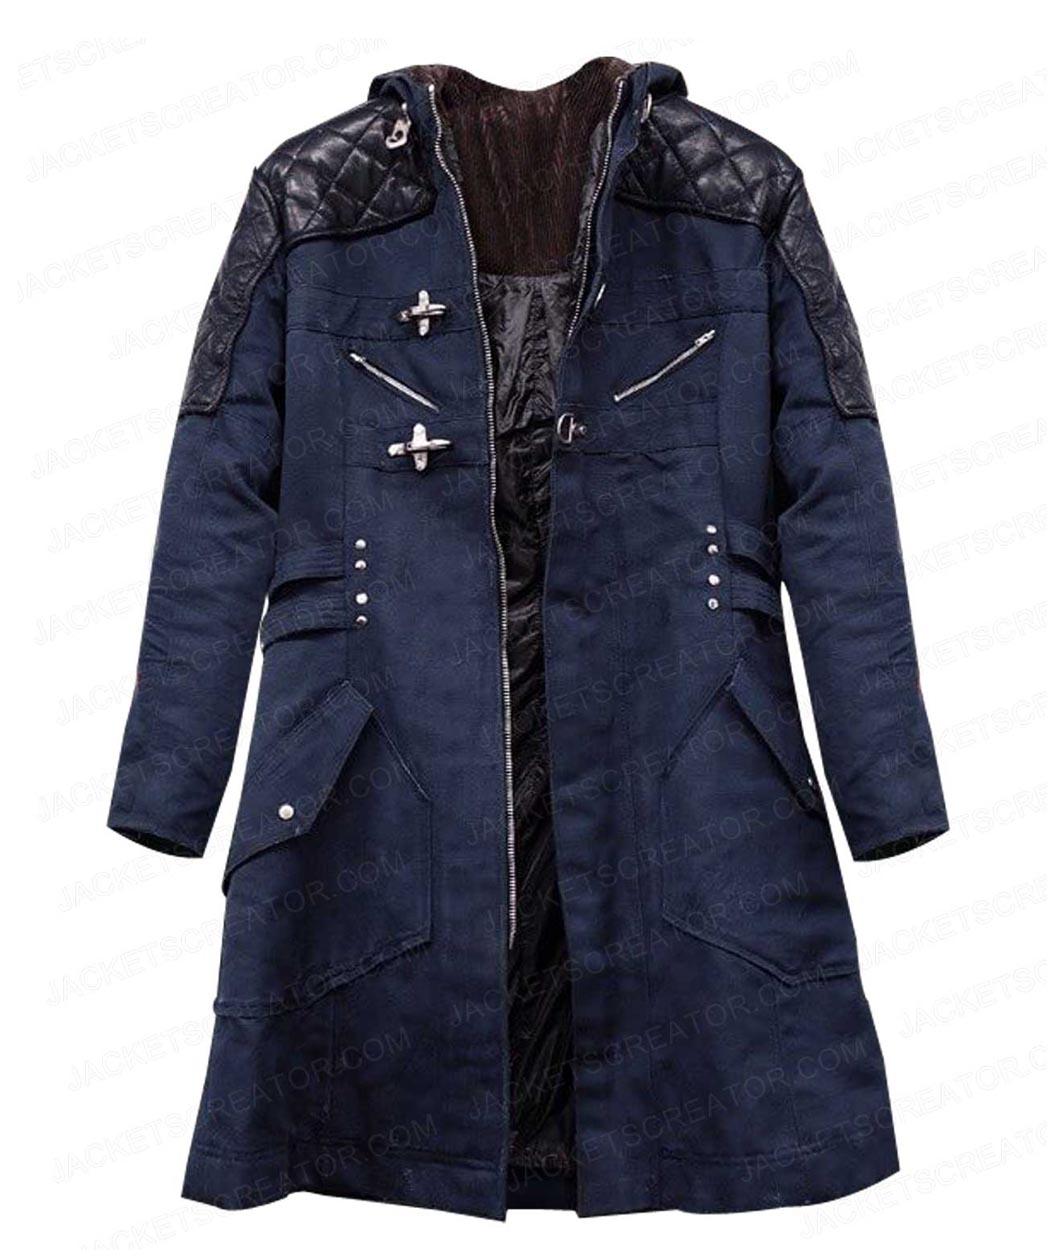 Devil May Cry 5 Blue Nero Coat with Hood - USA Leather Factory